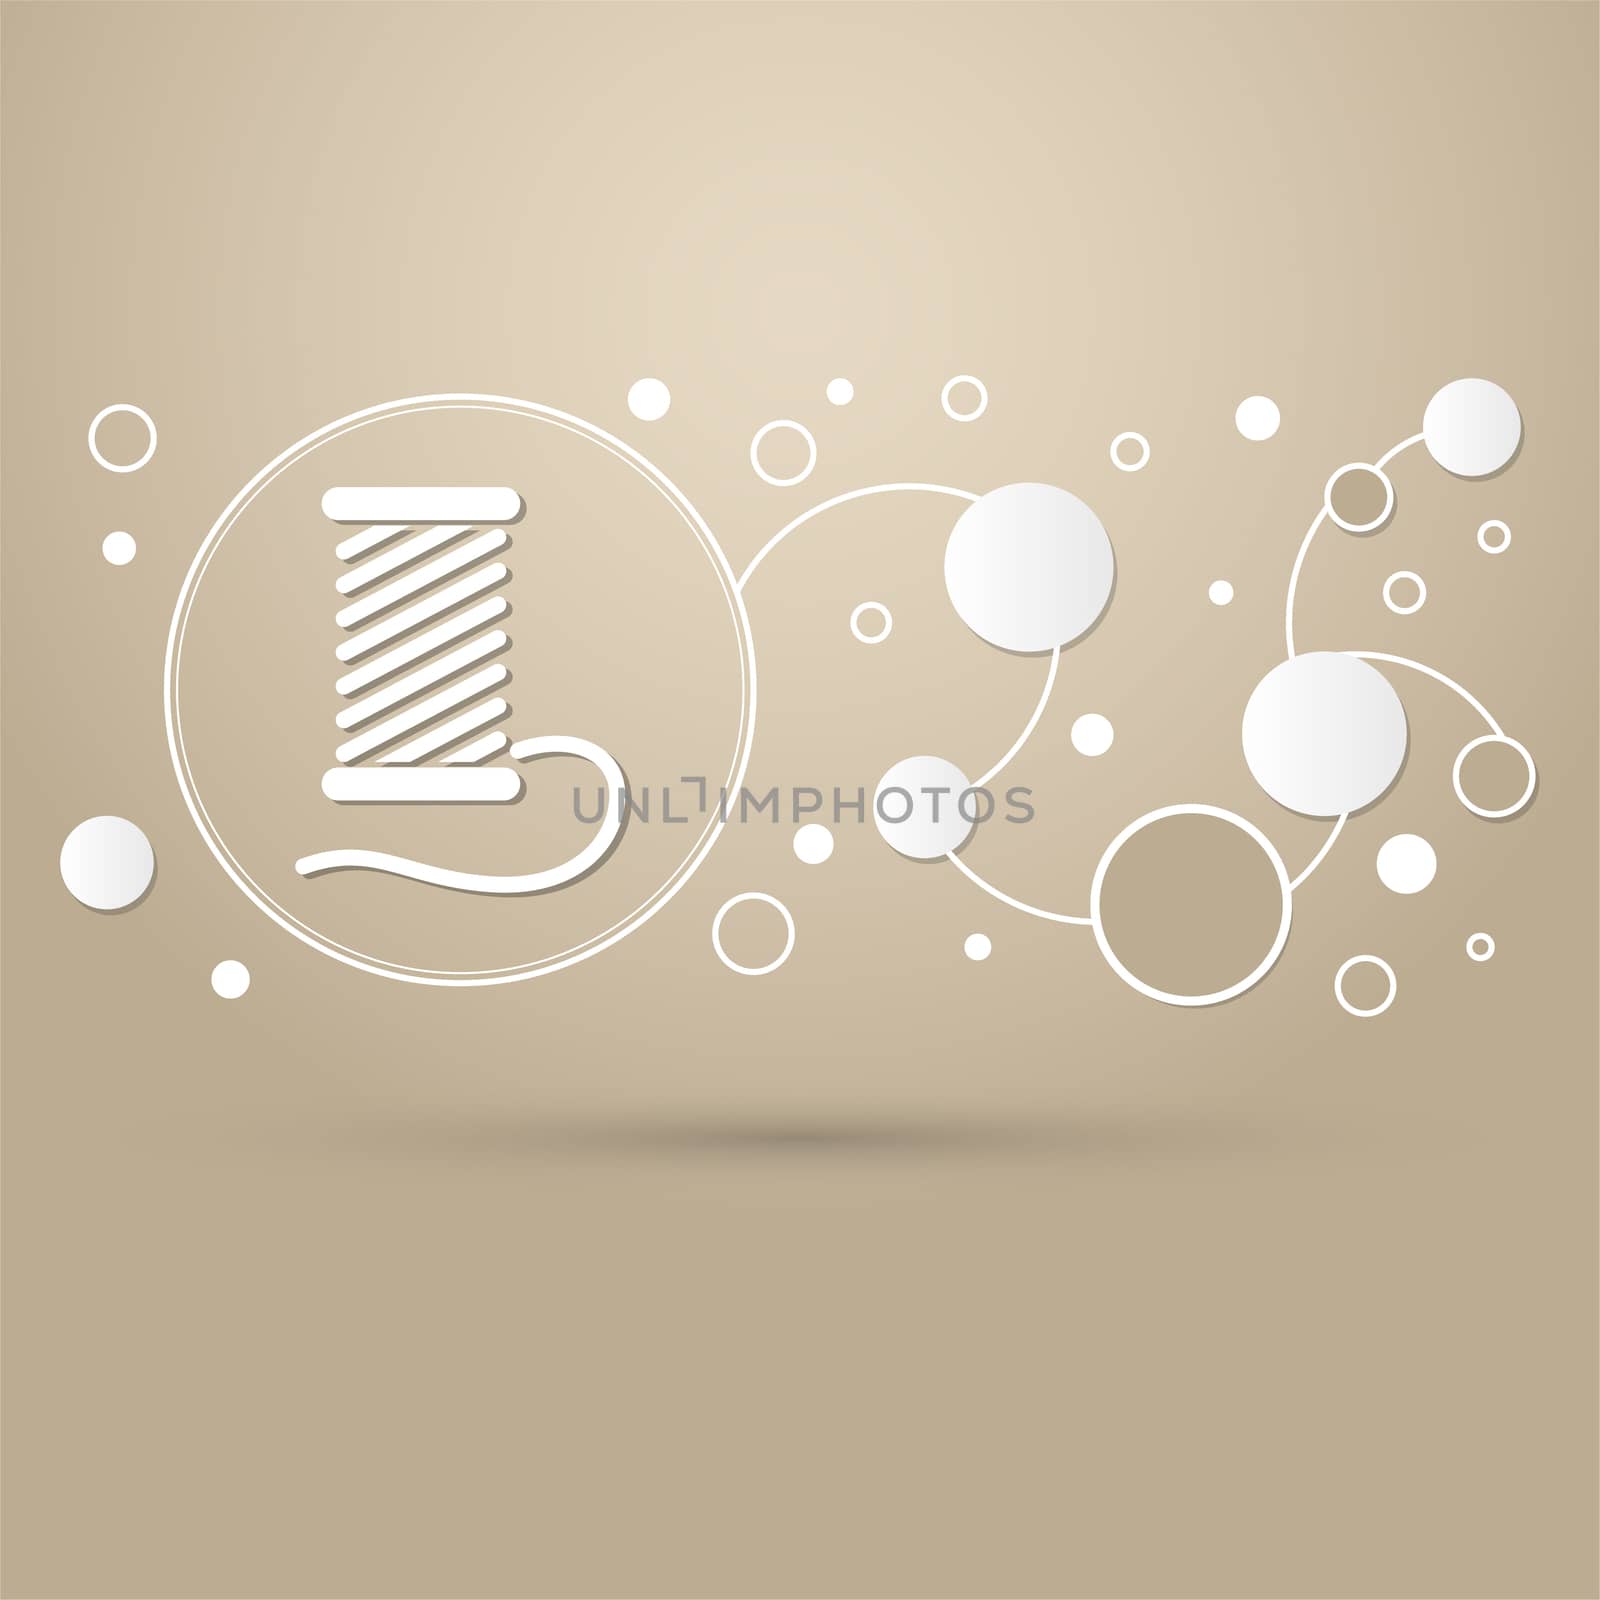 Thread Icon on a brown background with elegant style and modern design infographic. illustration